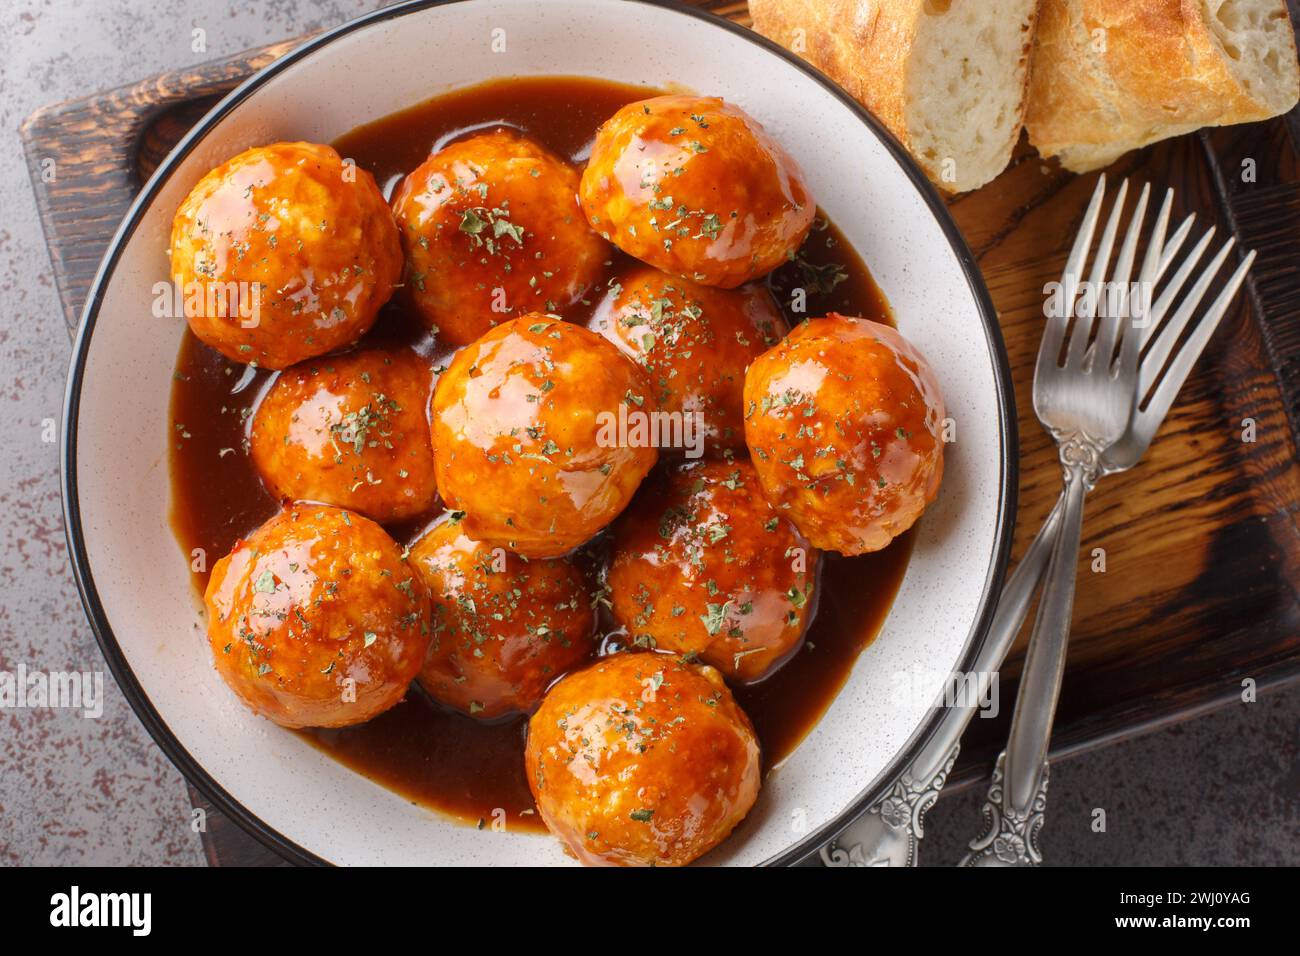 Baked meatballs are coated in a sweet and spicy honey chipotle sauce closeup on the bowl on the table. Horizontal top view from above Stock Photo